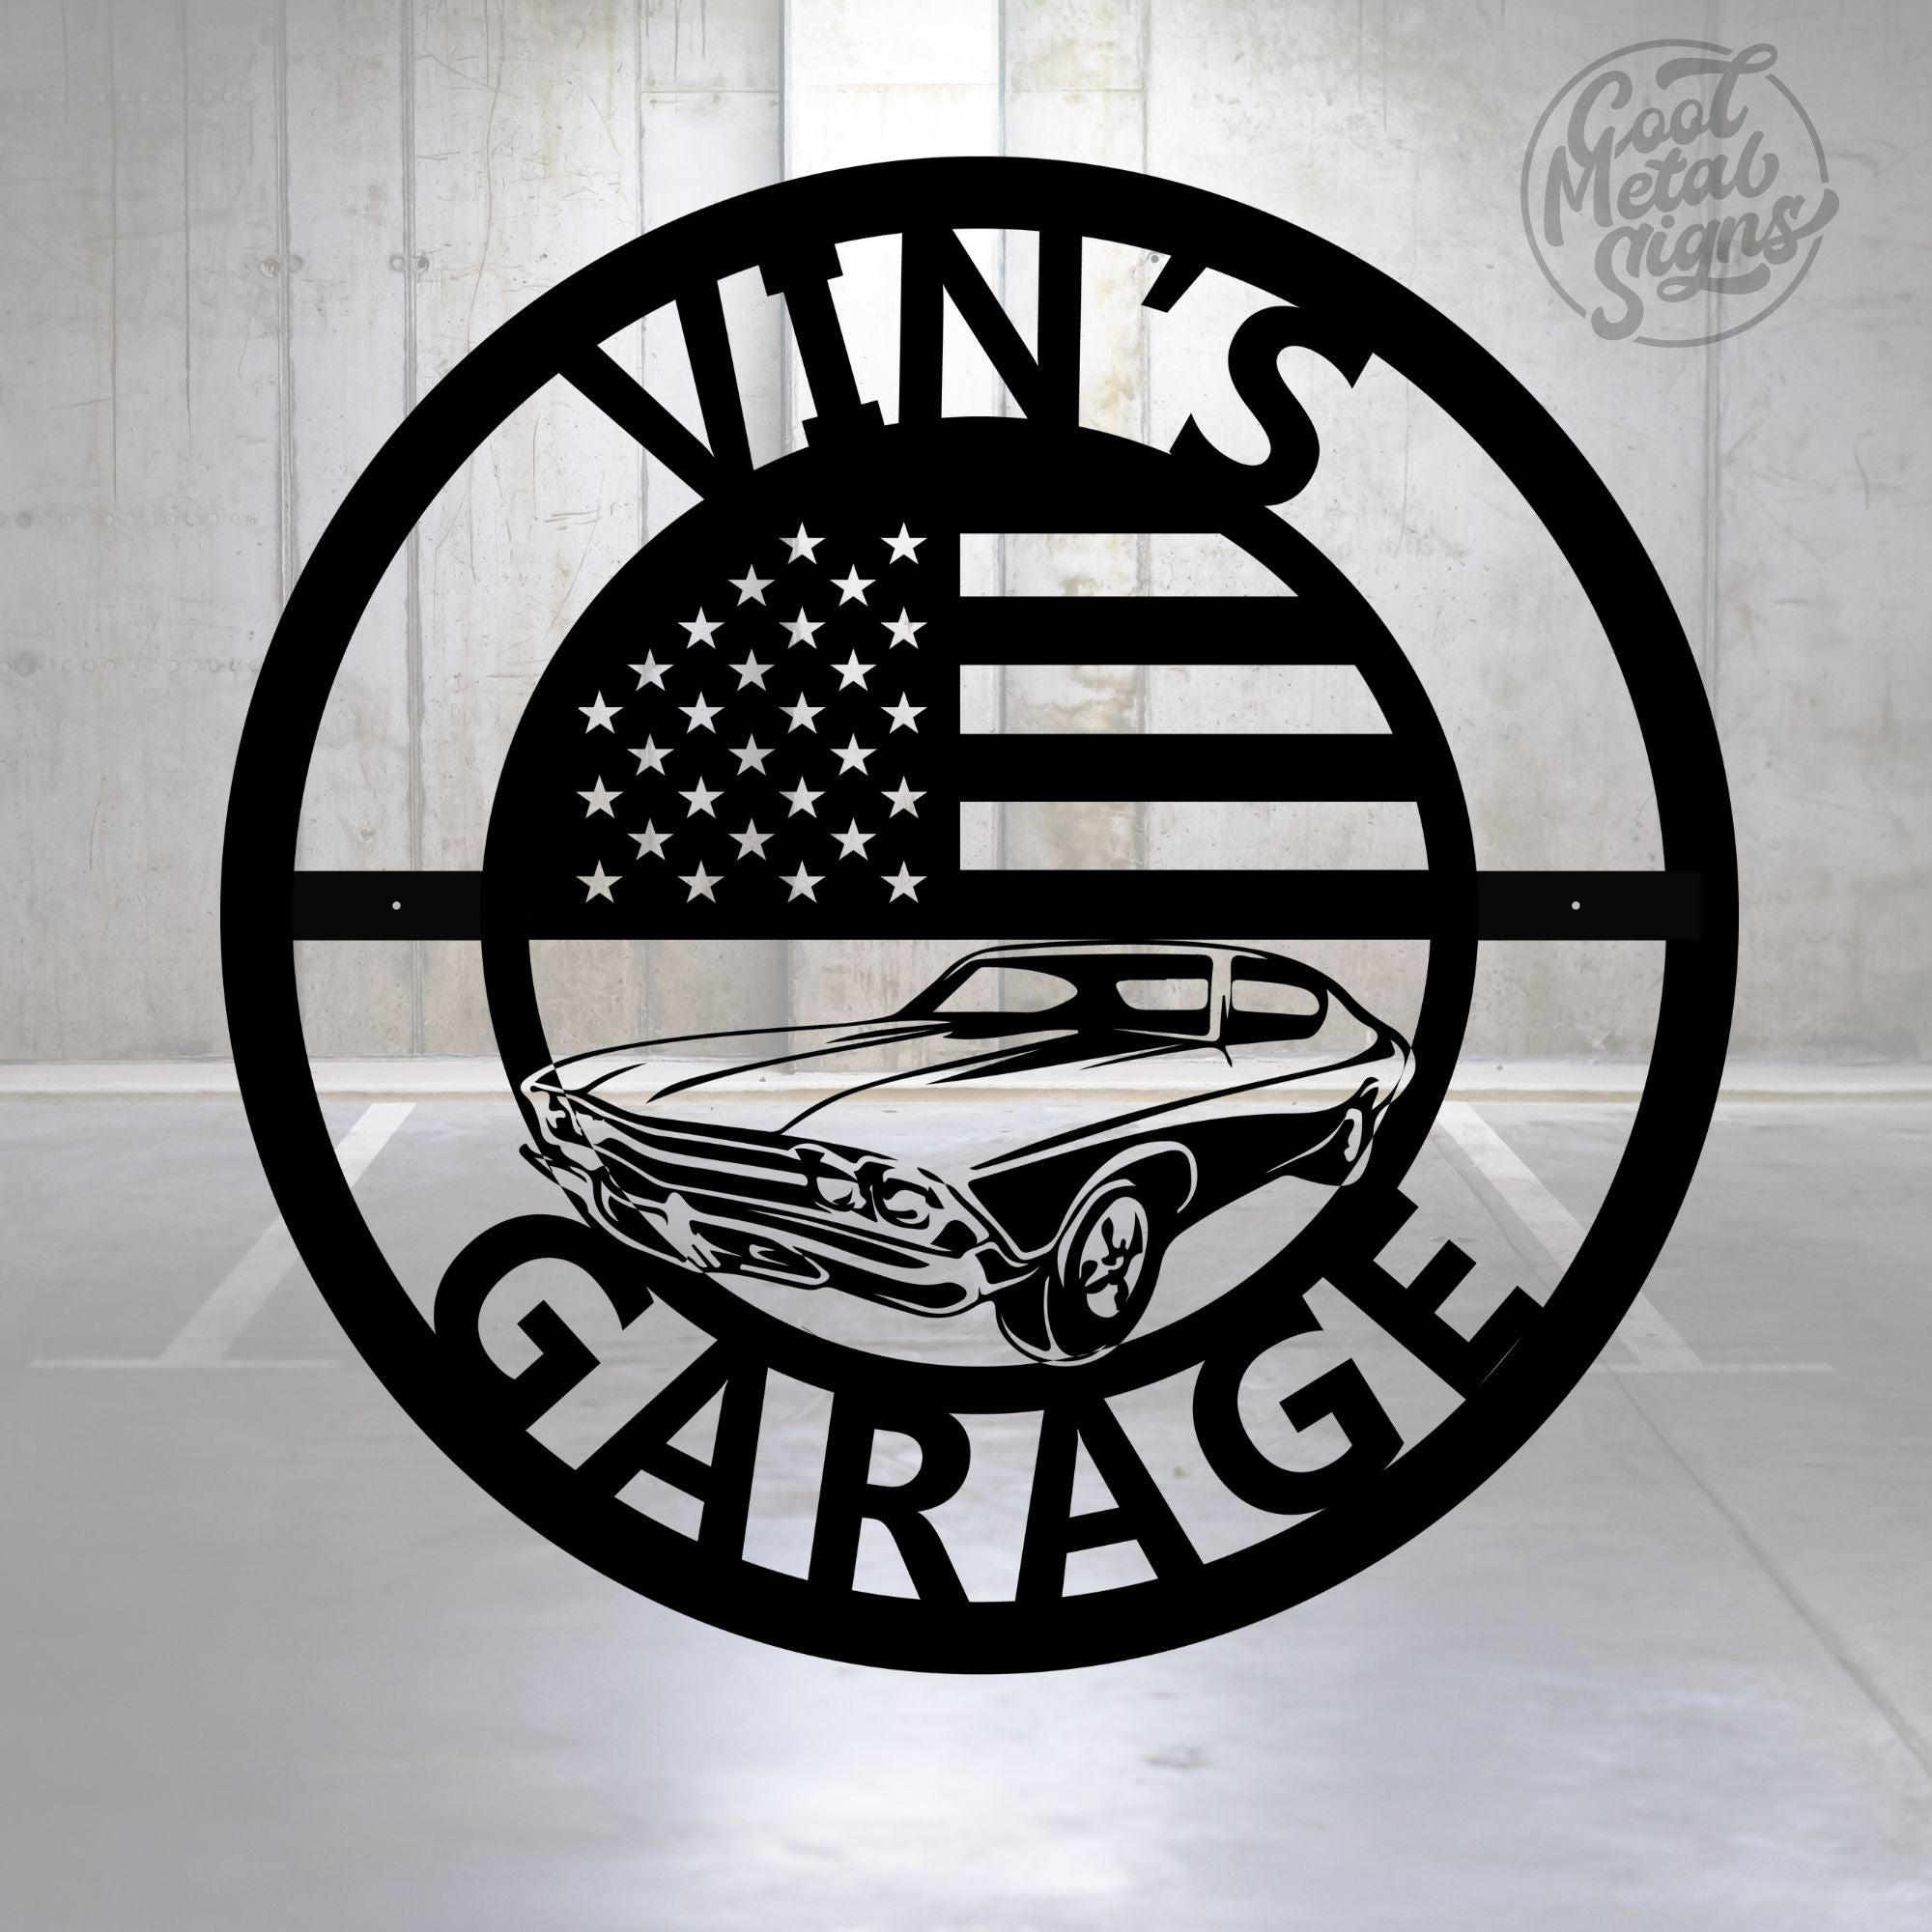 Personalized Chevelle Garage Sign - Cool Metal Signs